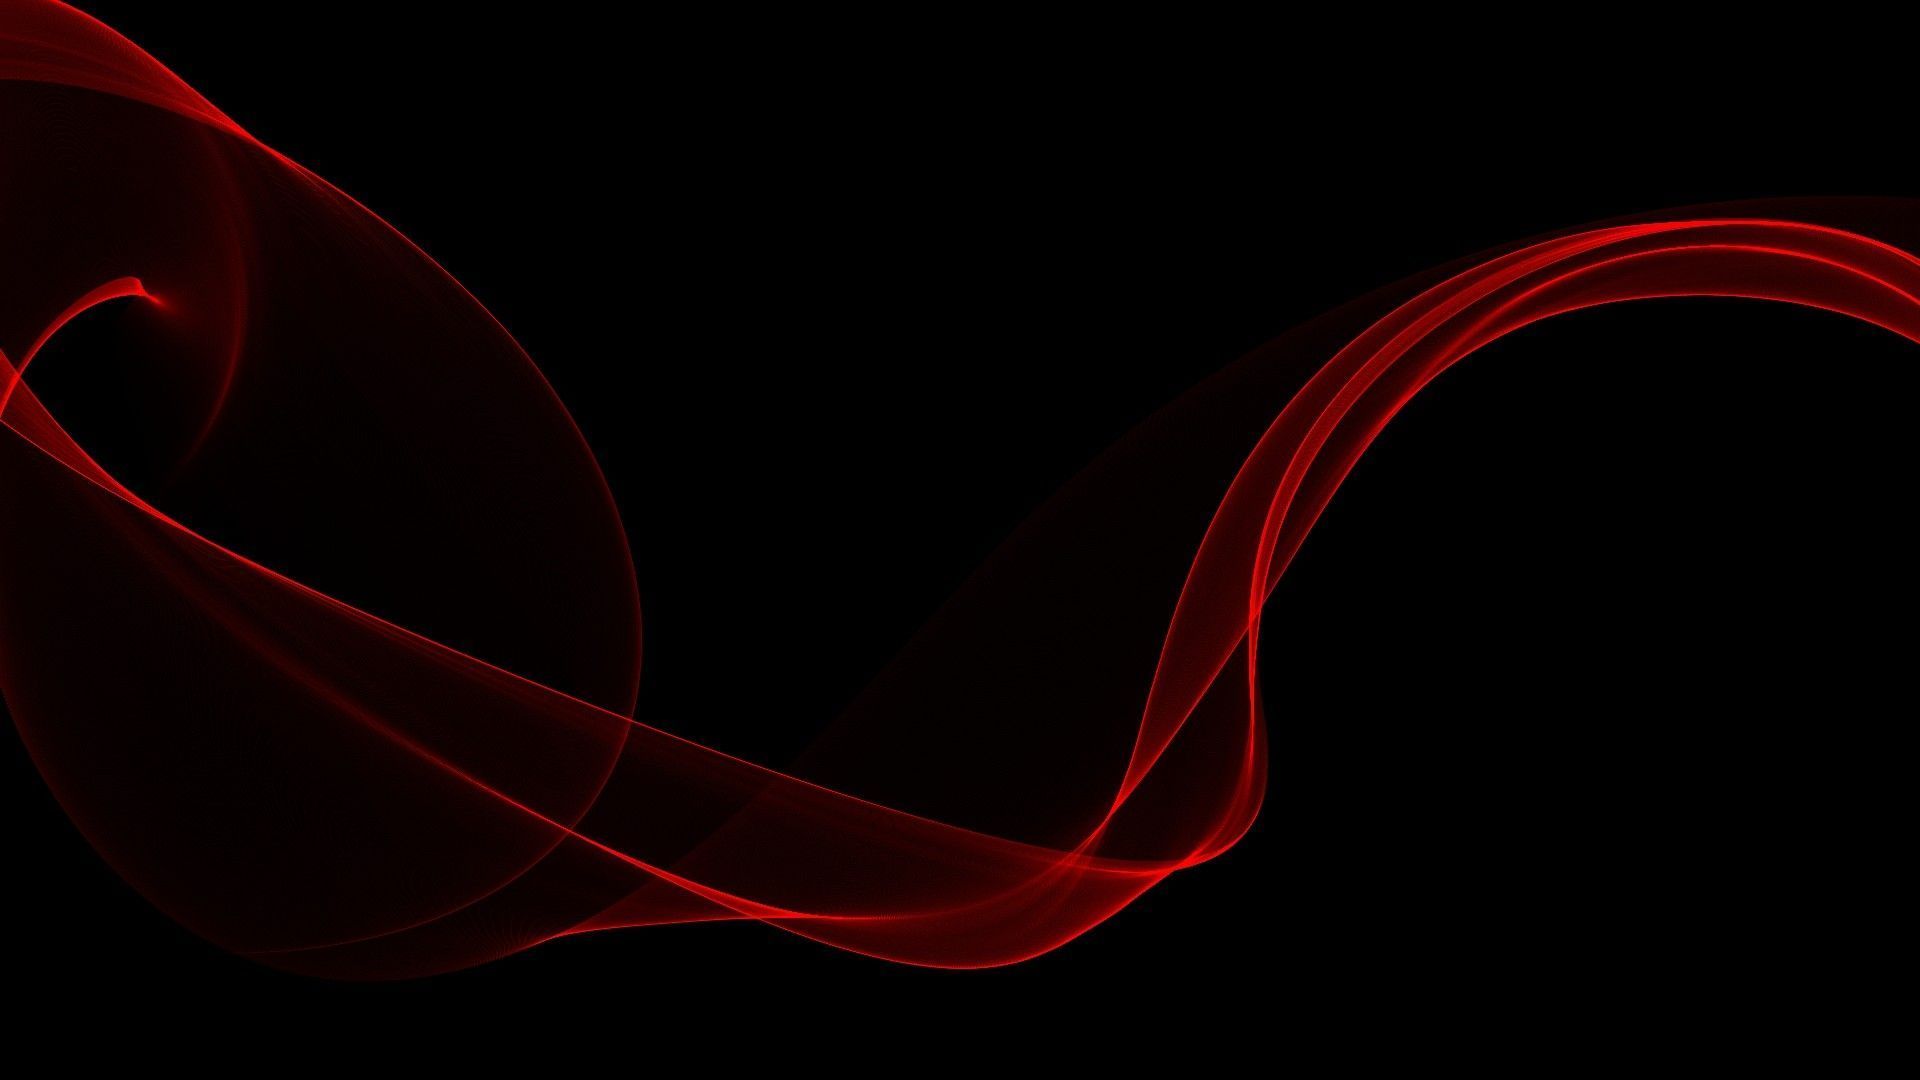 Red and Black Abstract Wallpaper Free Red and Black Abstract Background